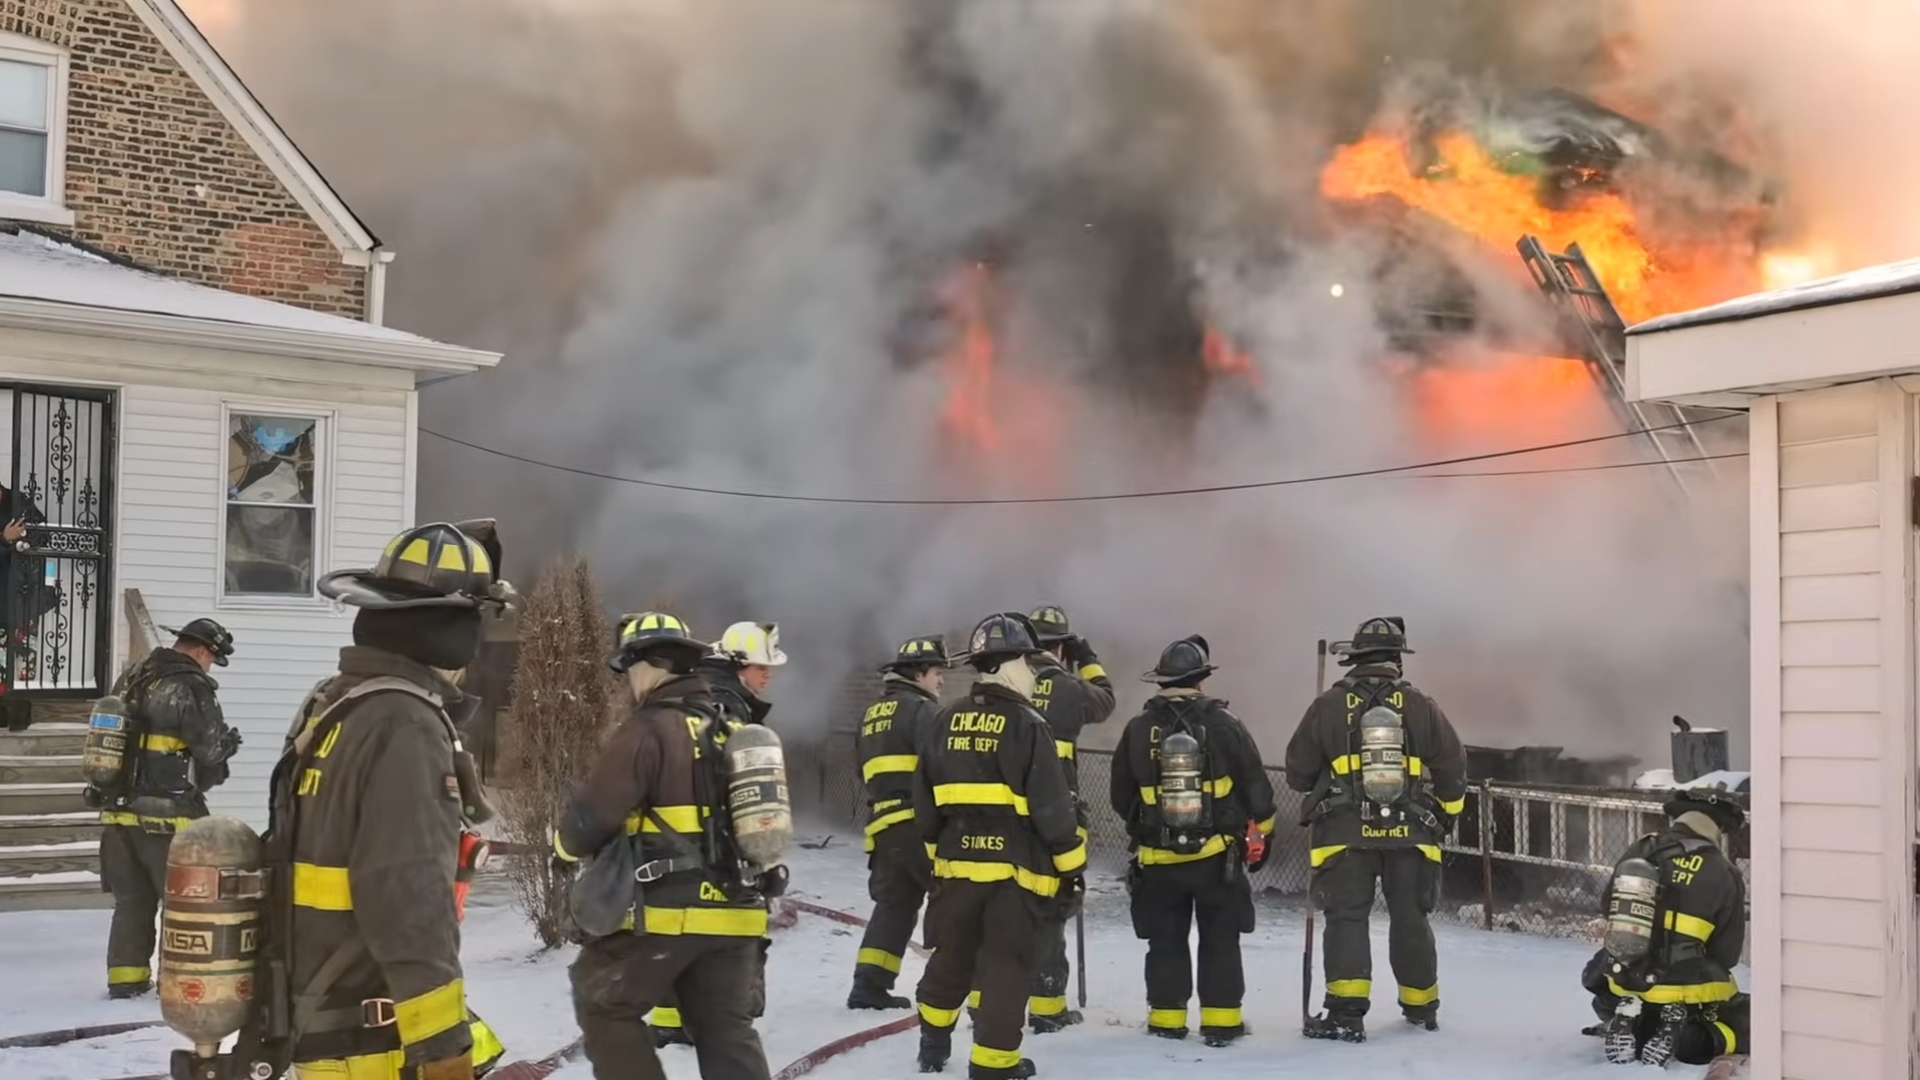 Video: Evacuation ordered at Chicago house fire